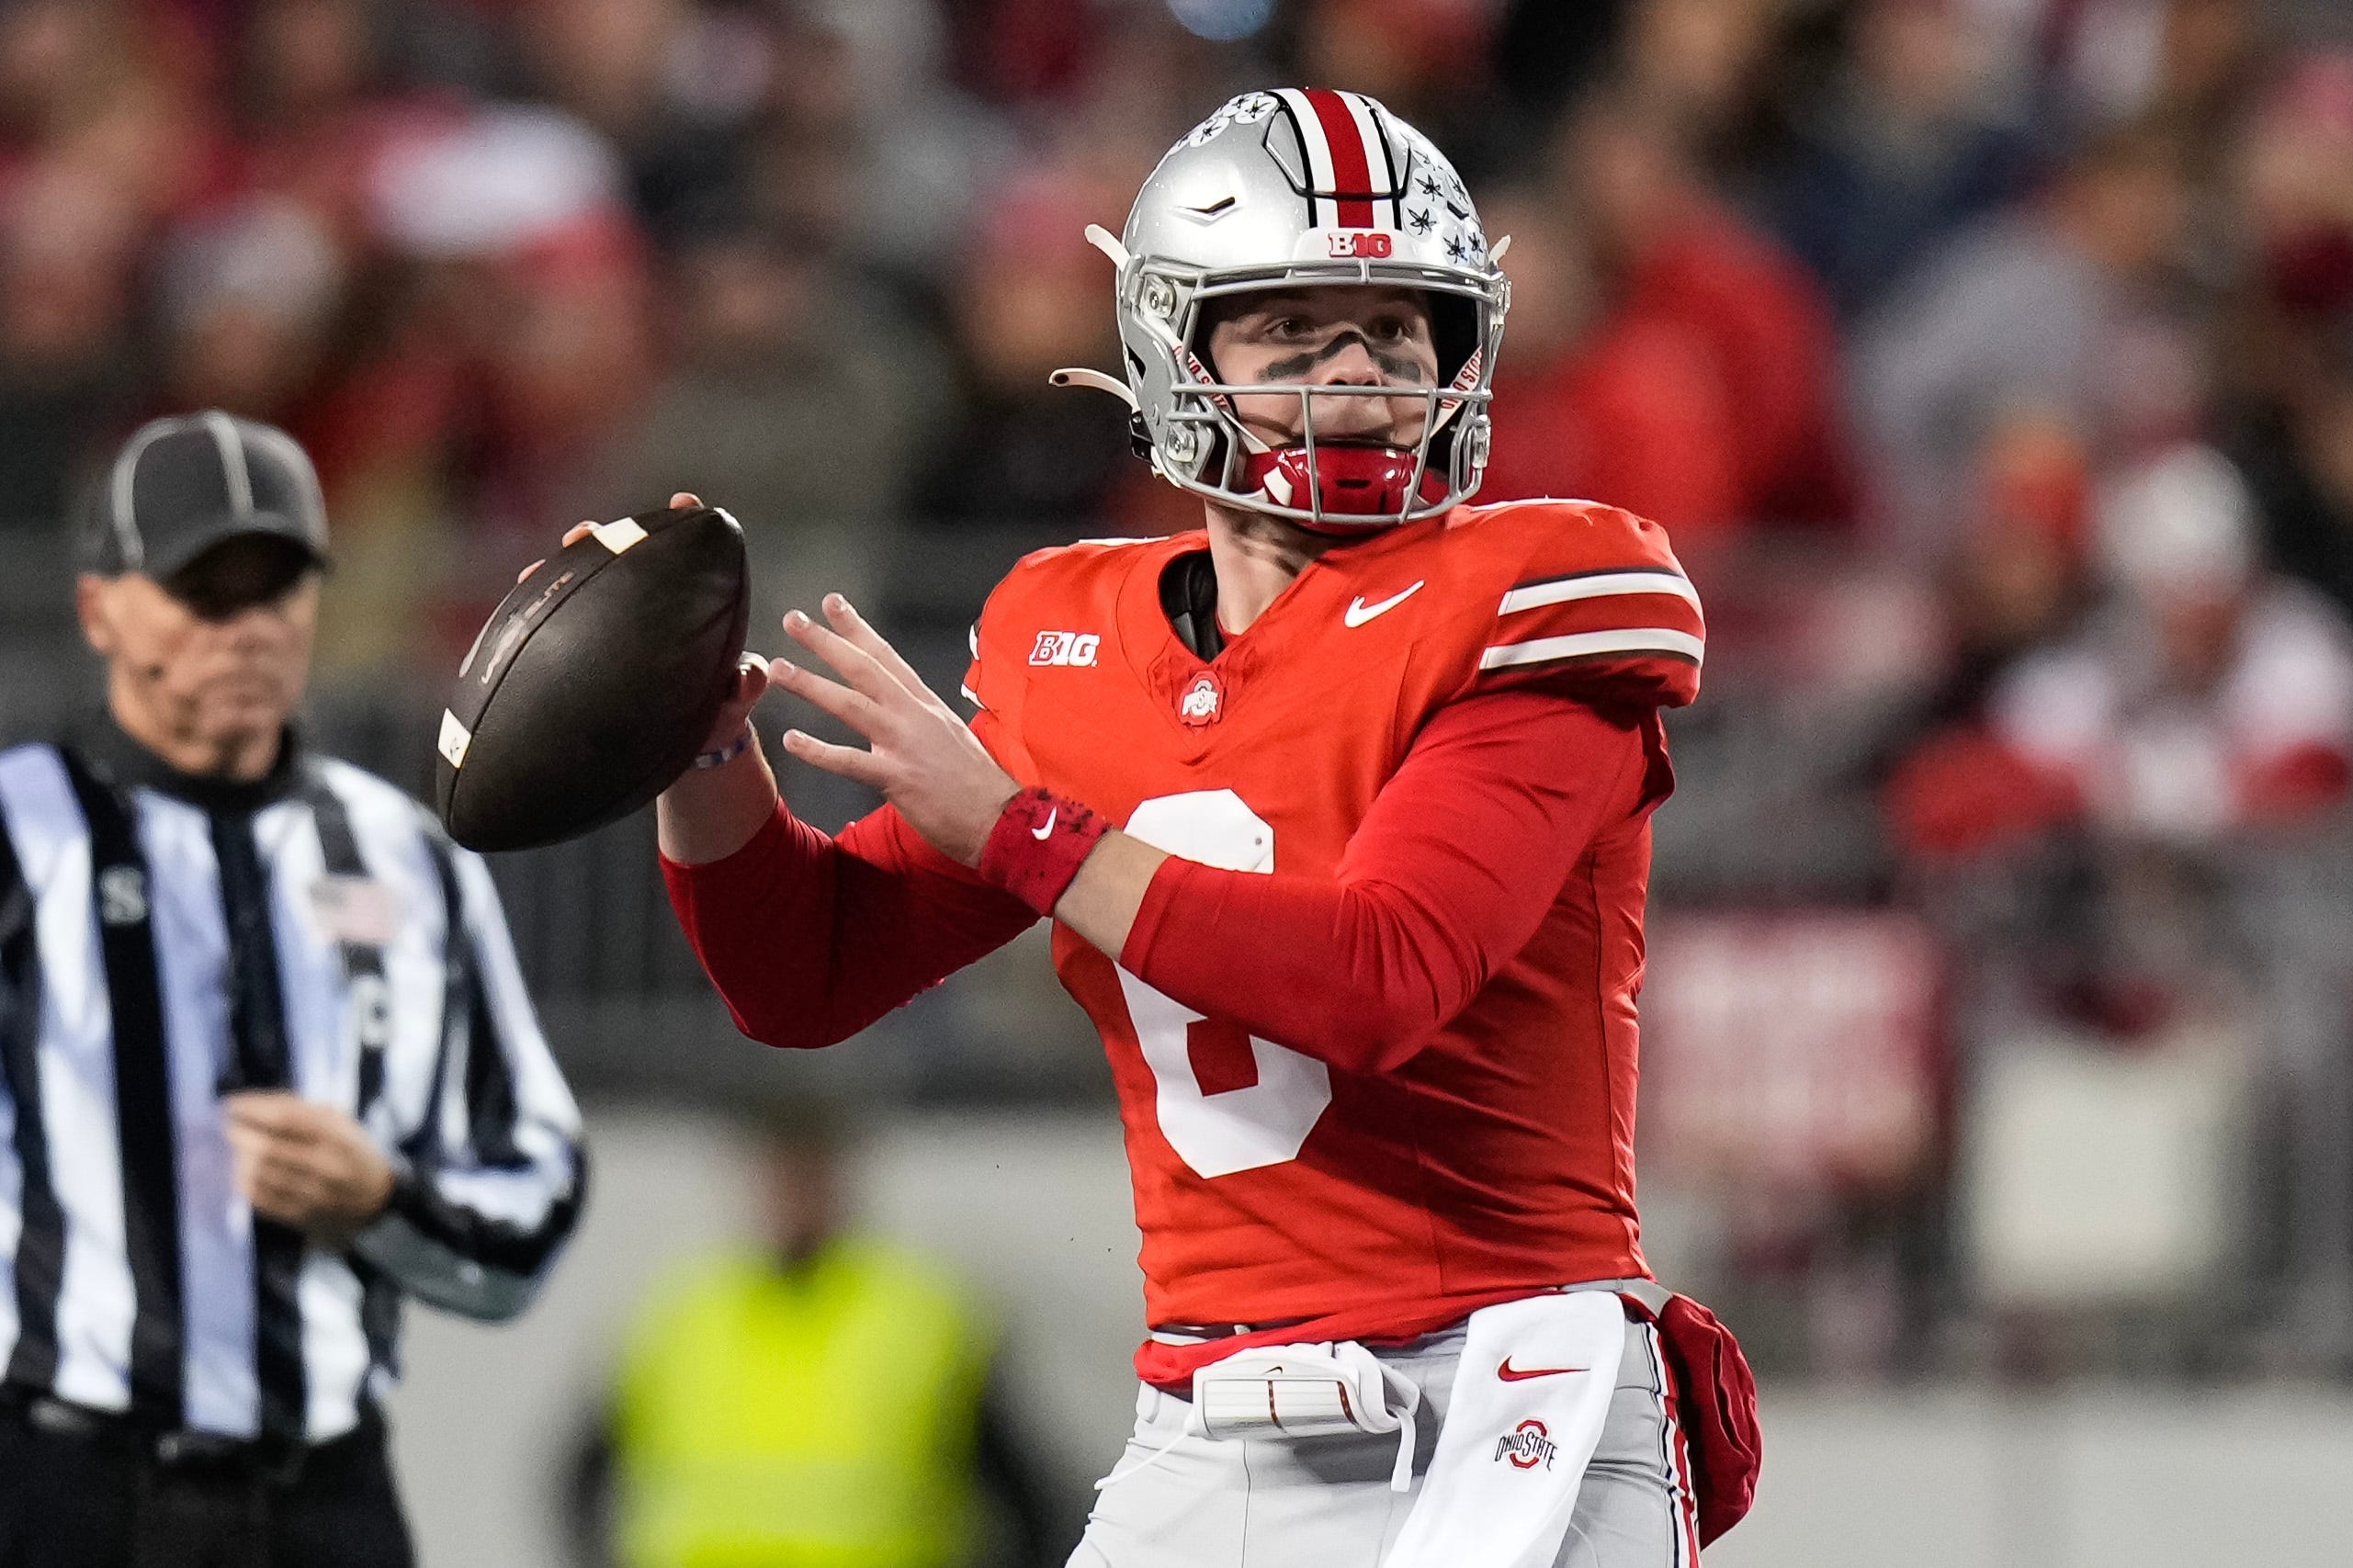 Expert bowl game handicapping: player and coaching uncertainty Kyle McCord Ohio State